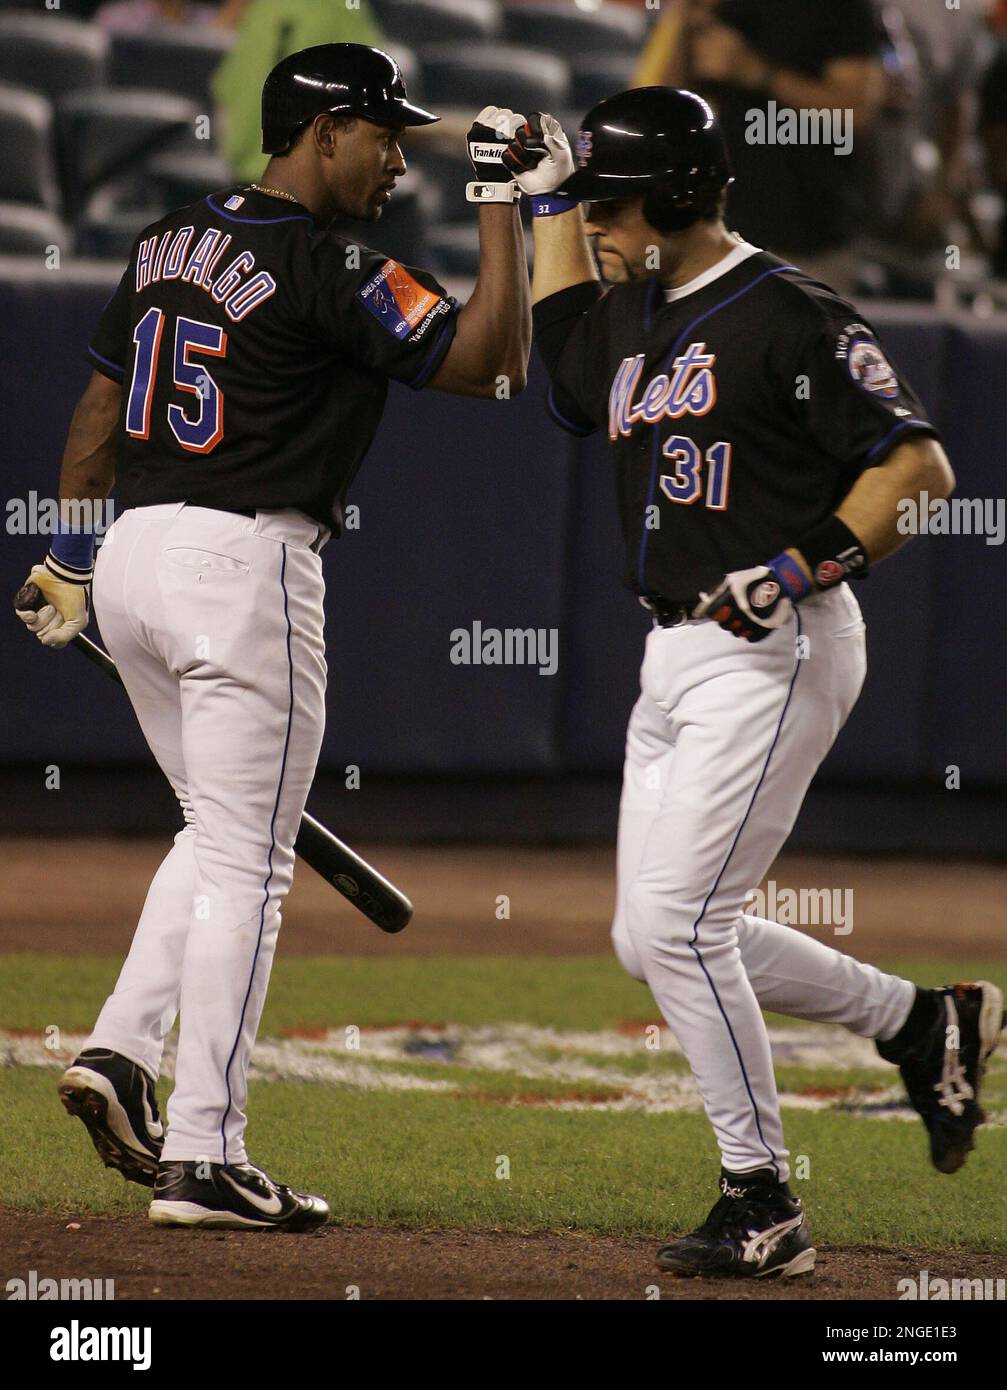 New York Mets' Mike Piazza is congratulated by Richard Hidalgo